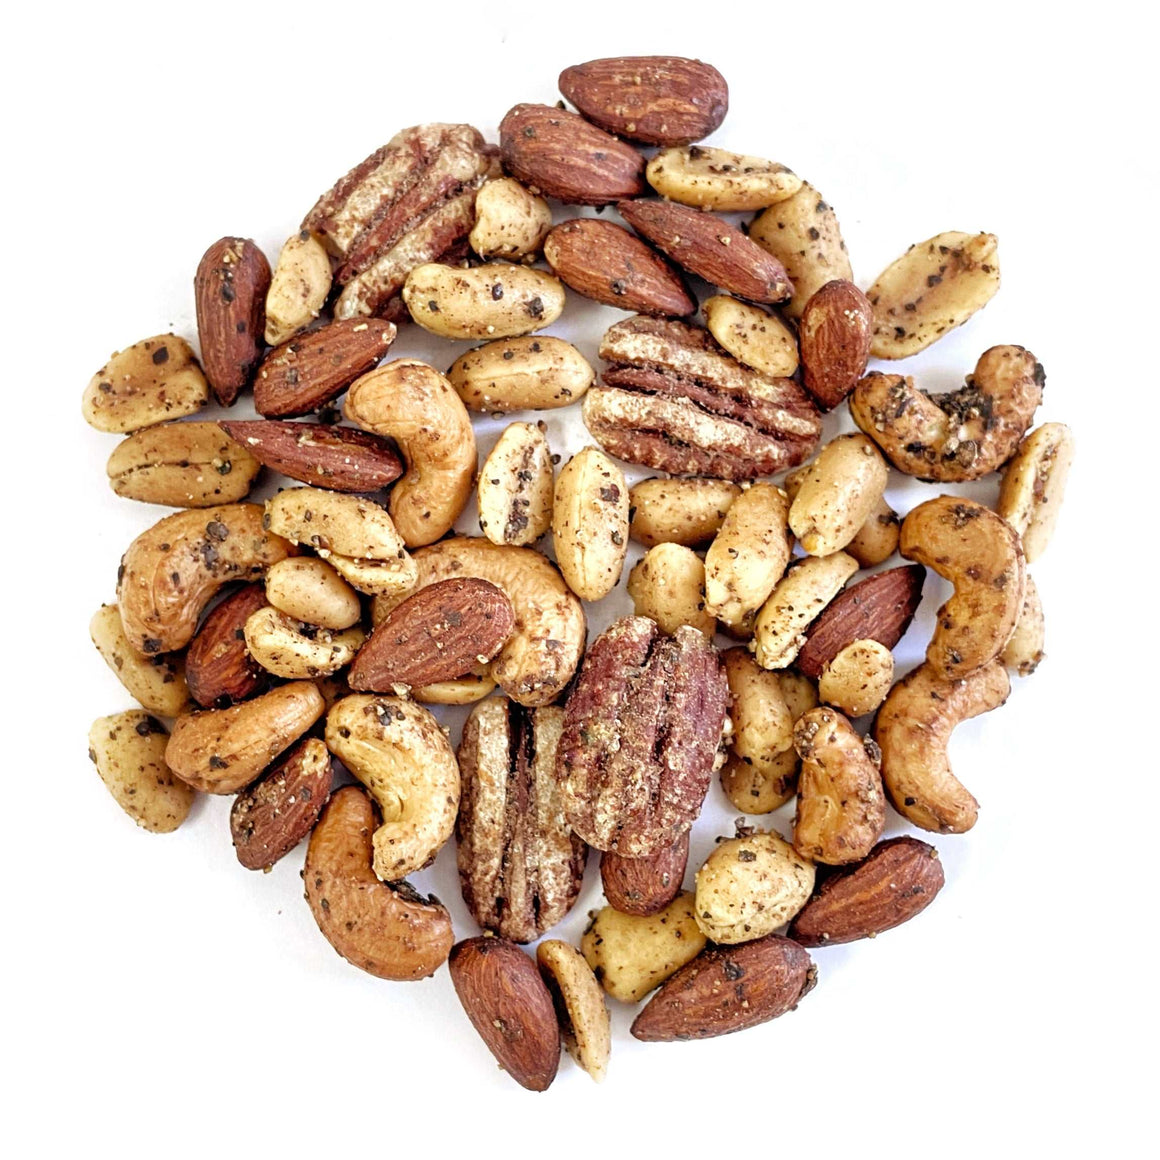 Black Pepper Mixed Nuts in a circle on a white background.